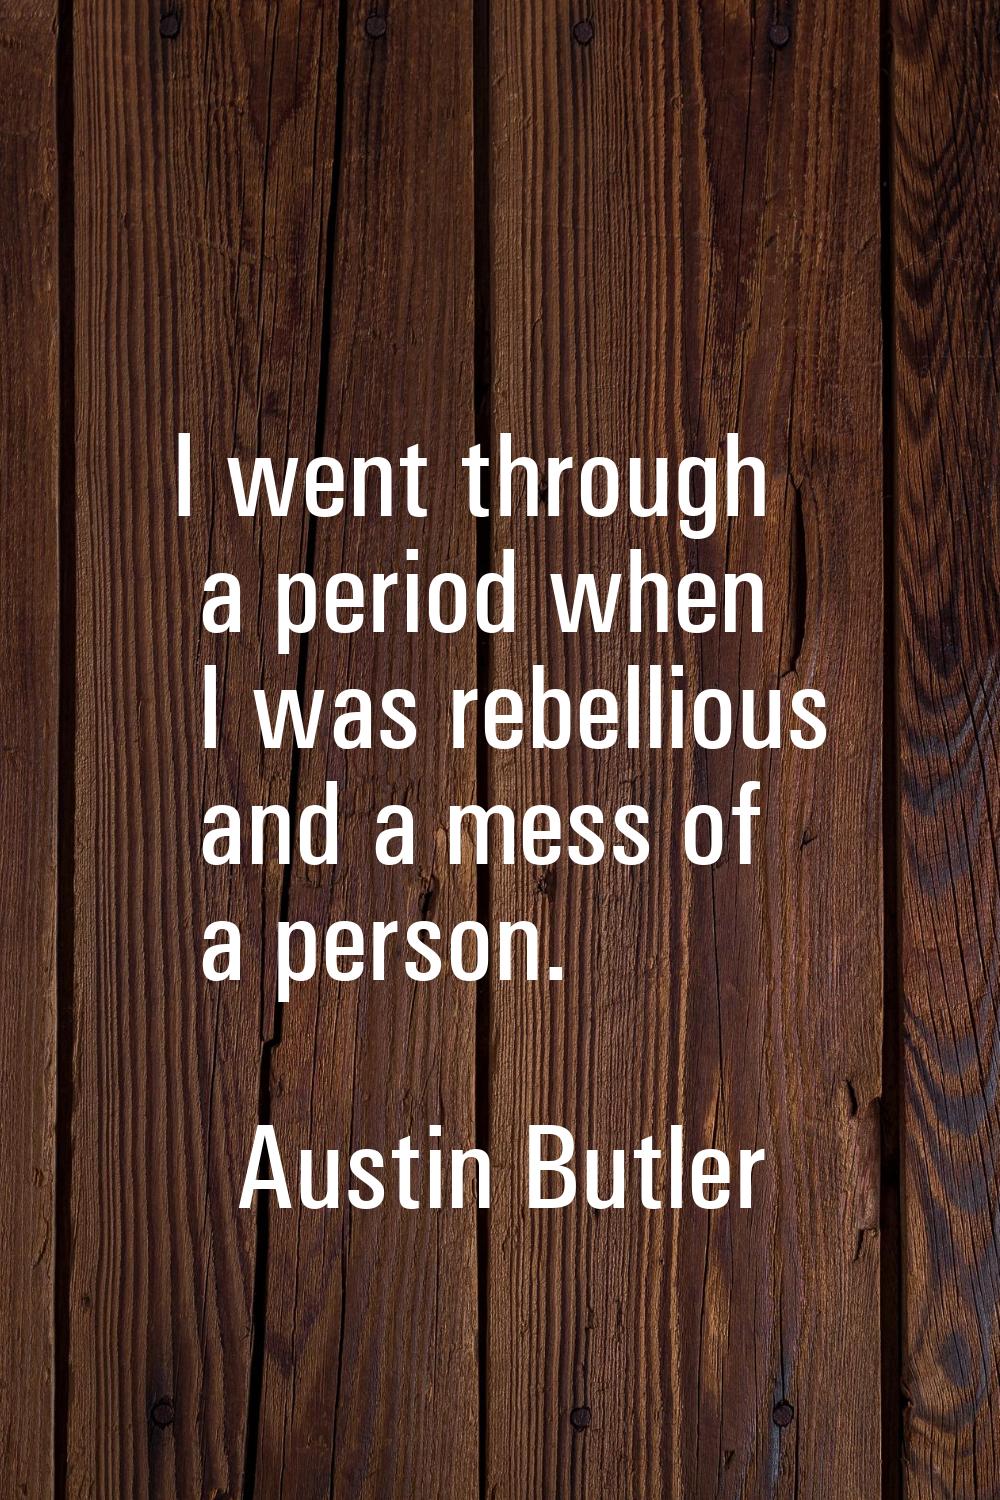 I went through a period when I was rebellious and a mess of a person.